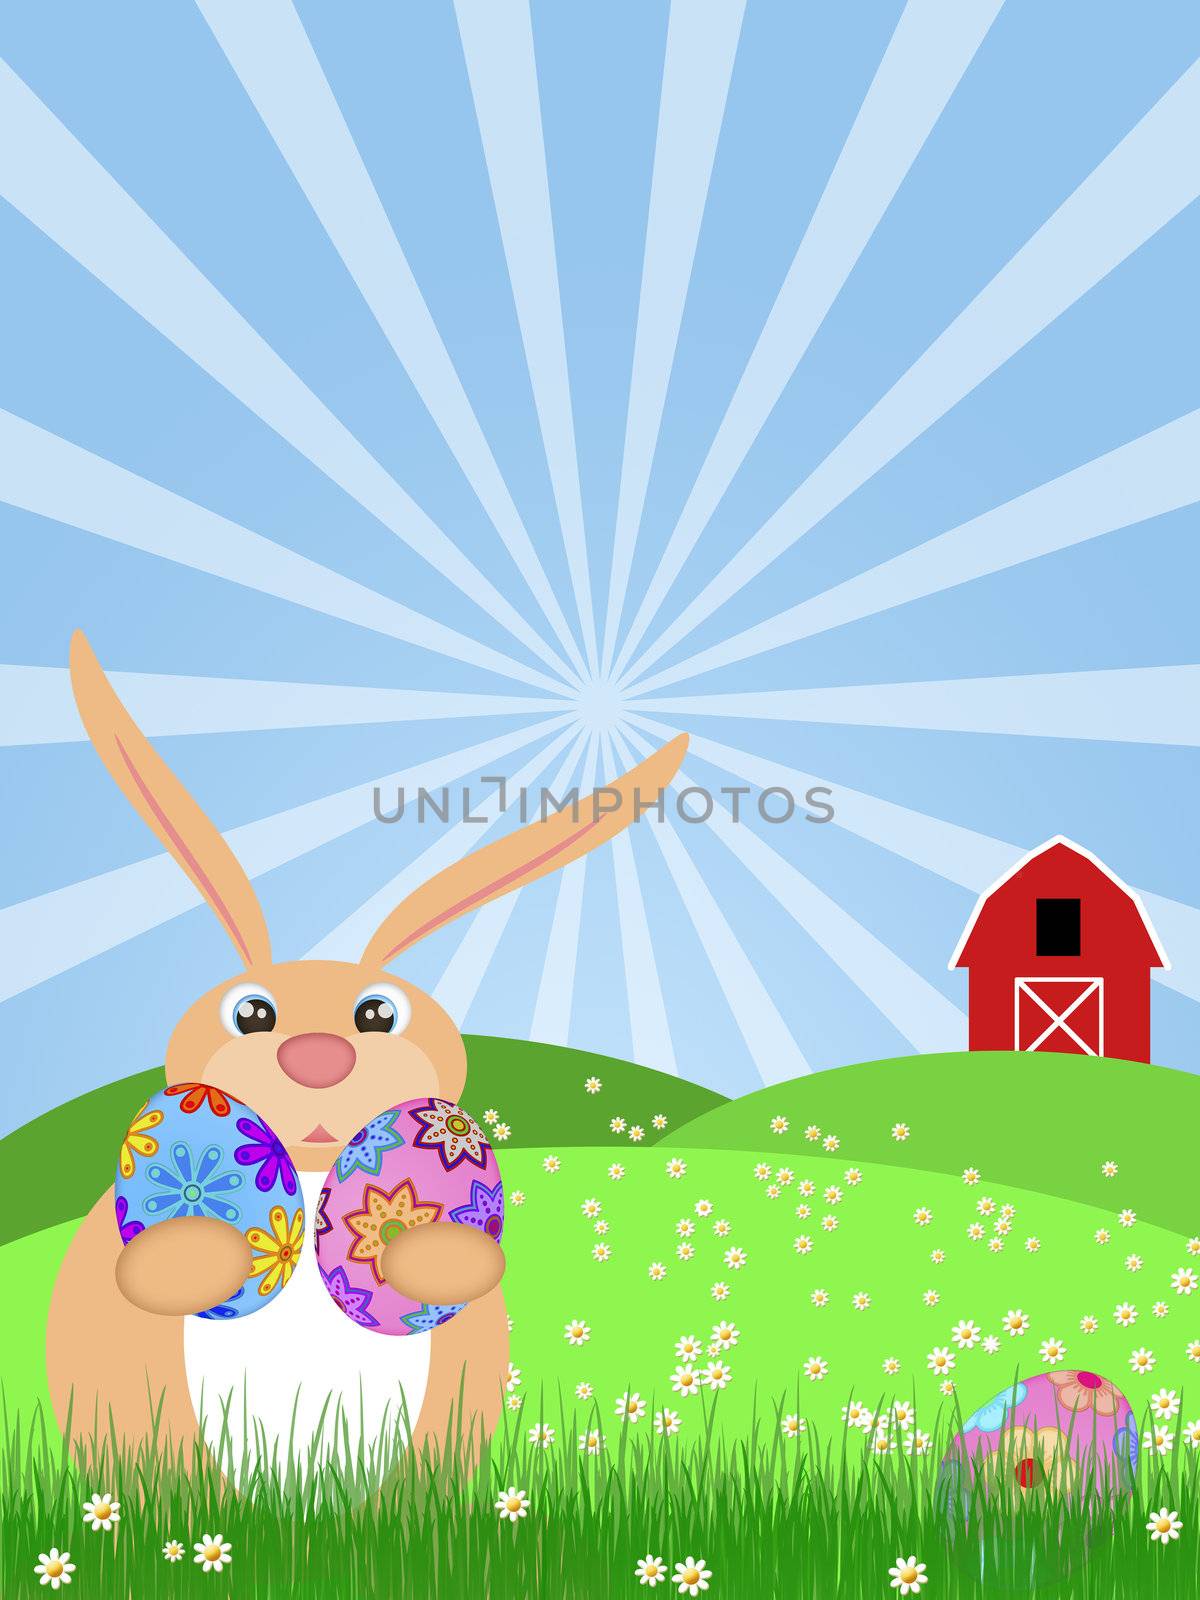 Happy Easter Bunny Rabbit Egg Hunting on Green Pasture with Red Barn Illustration